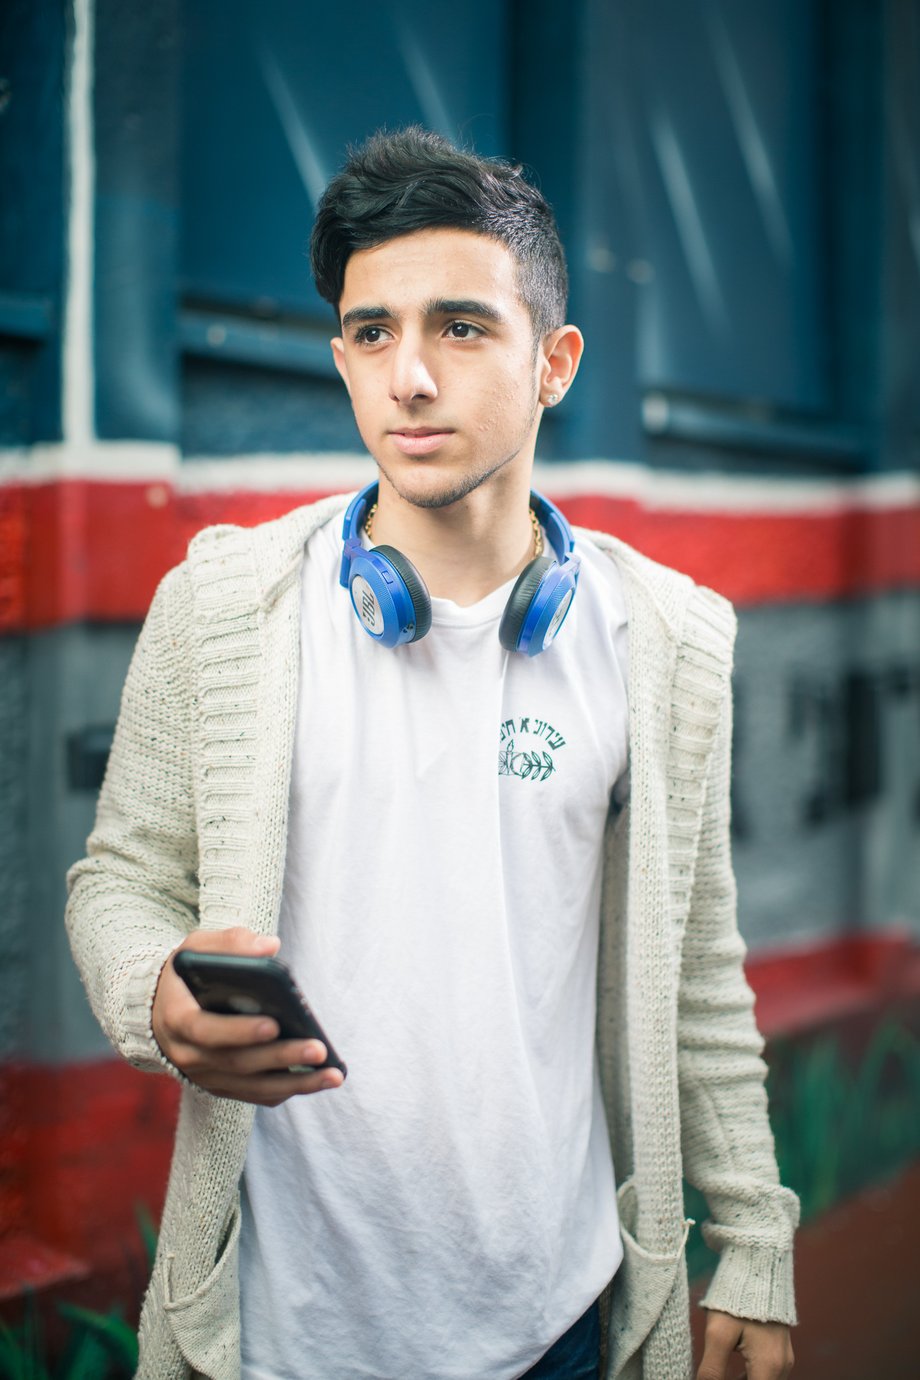 Ronen Goldman's portrait of a student holding a cell phone and wearing a headset around his neck